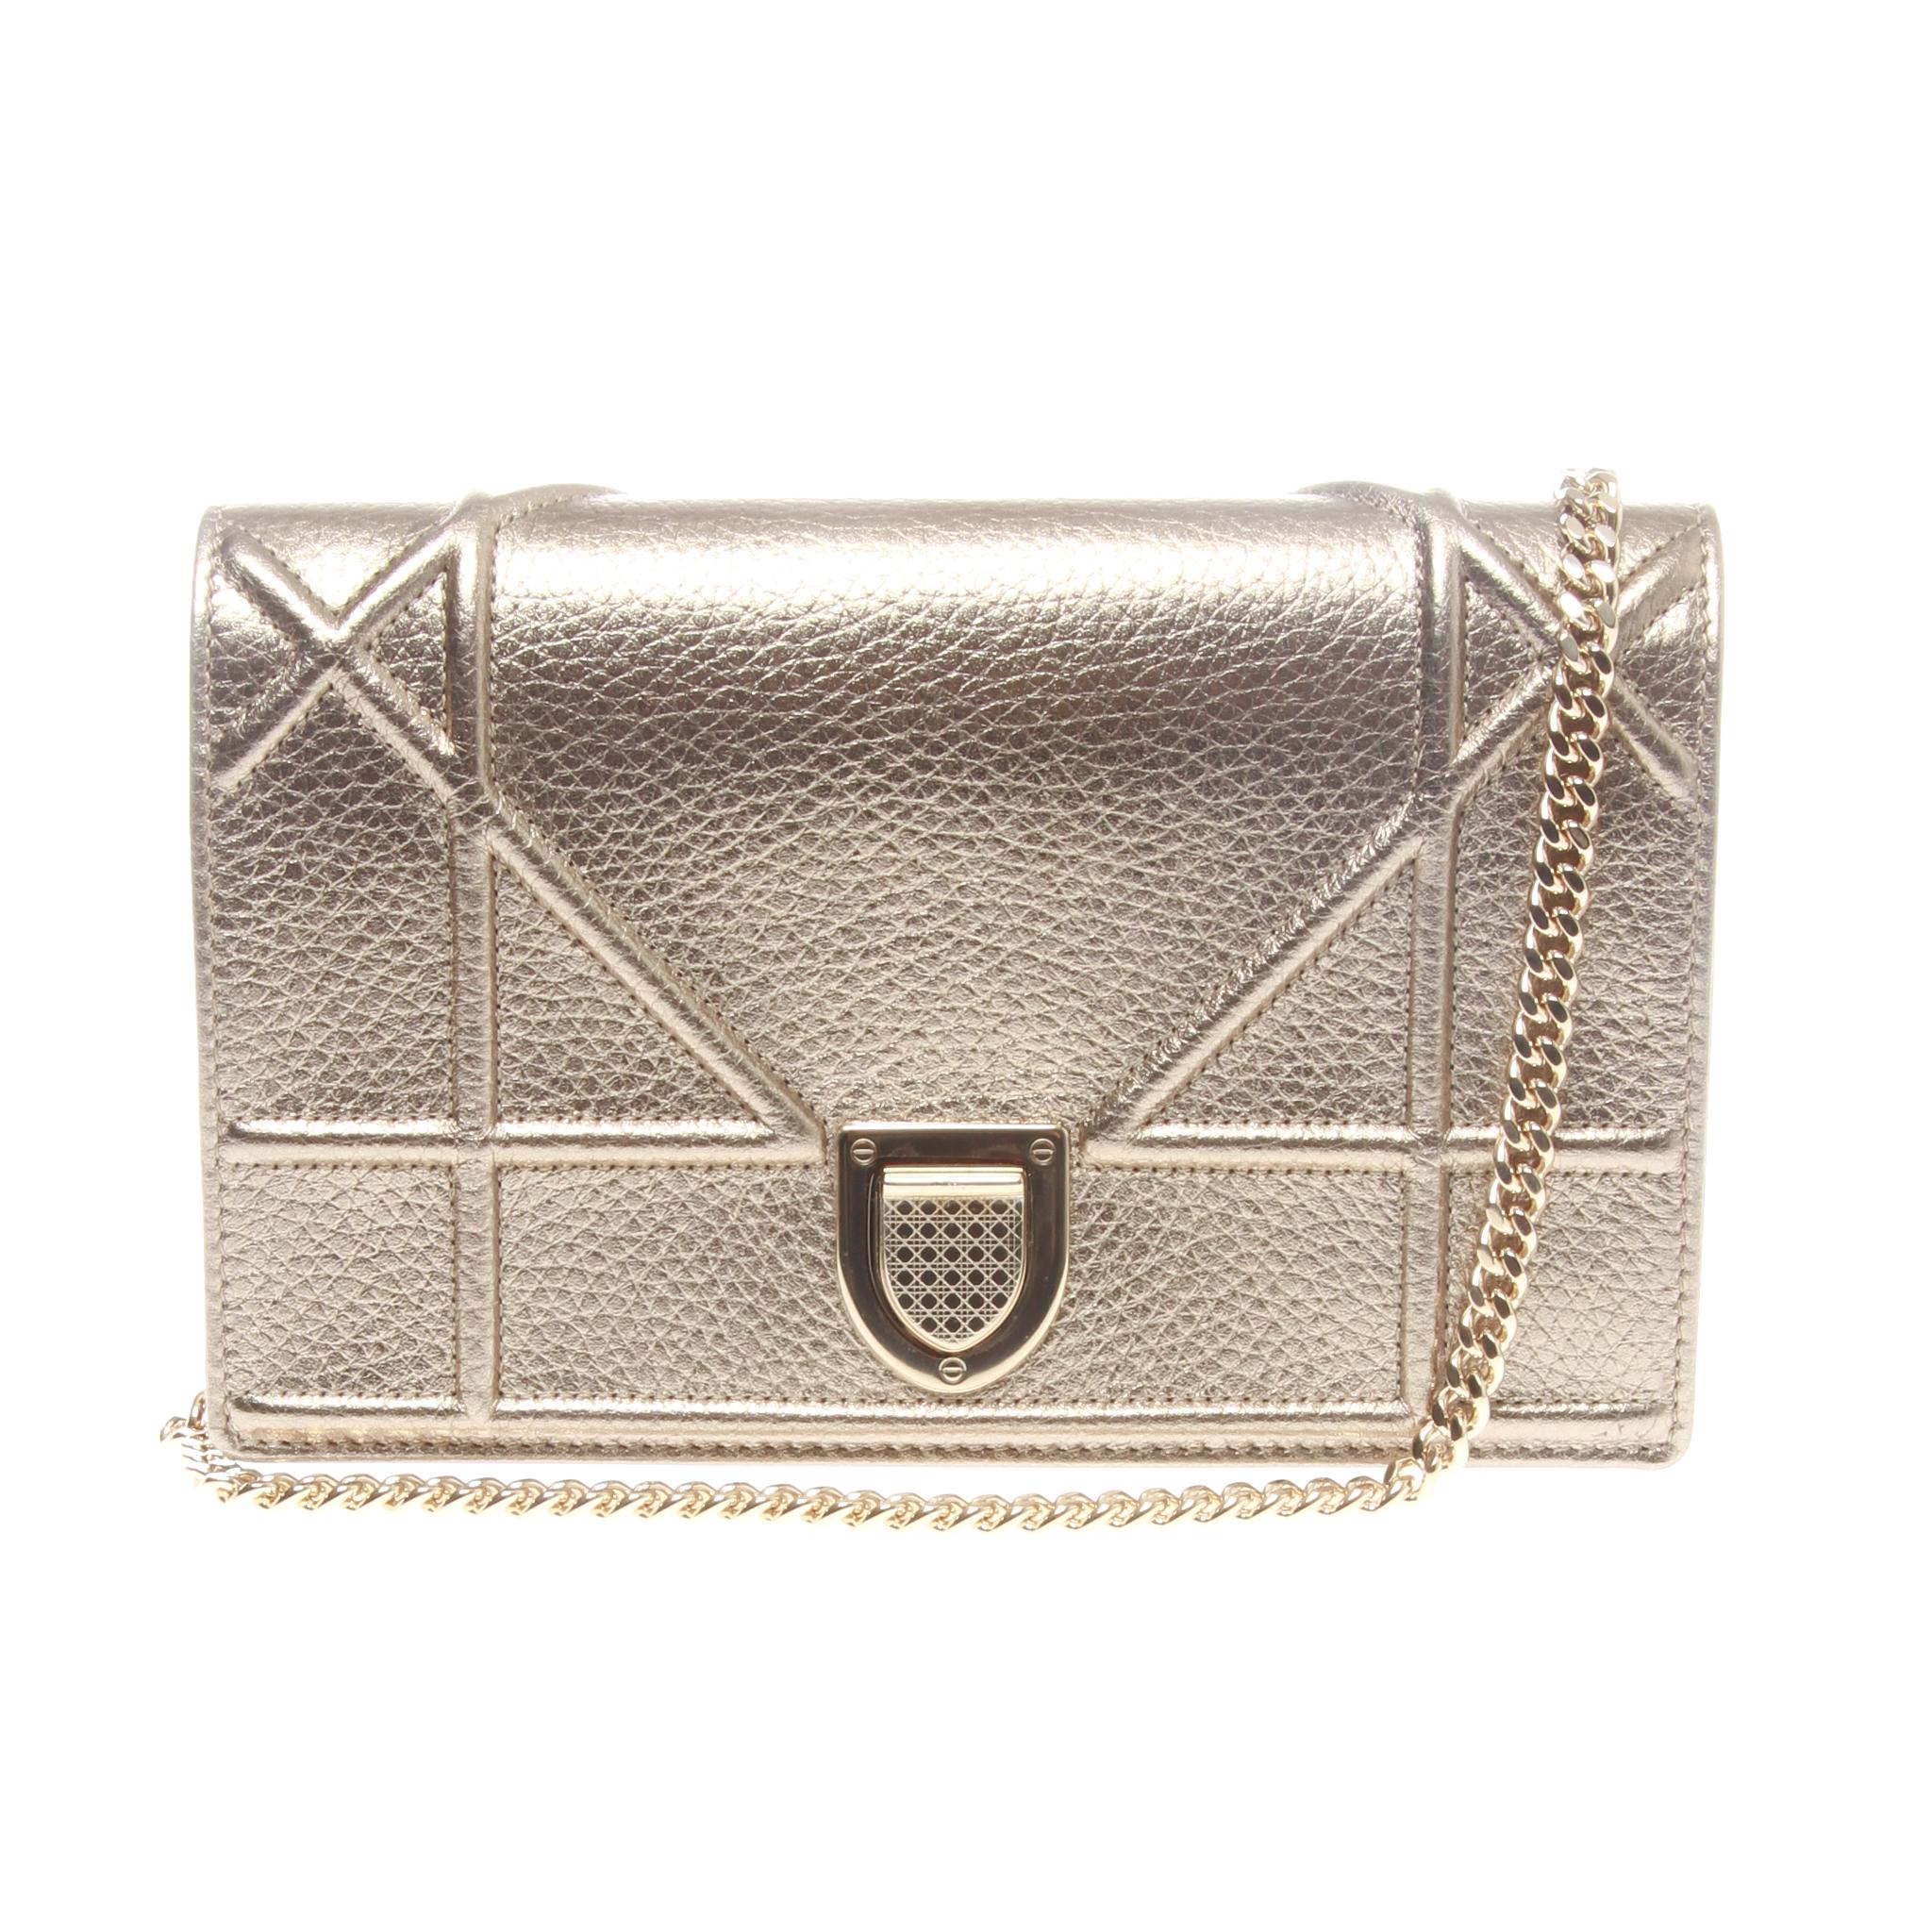 Christian Dior Diorama Wallet on chain pouch in nude grained calfskin